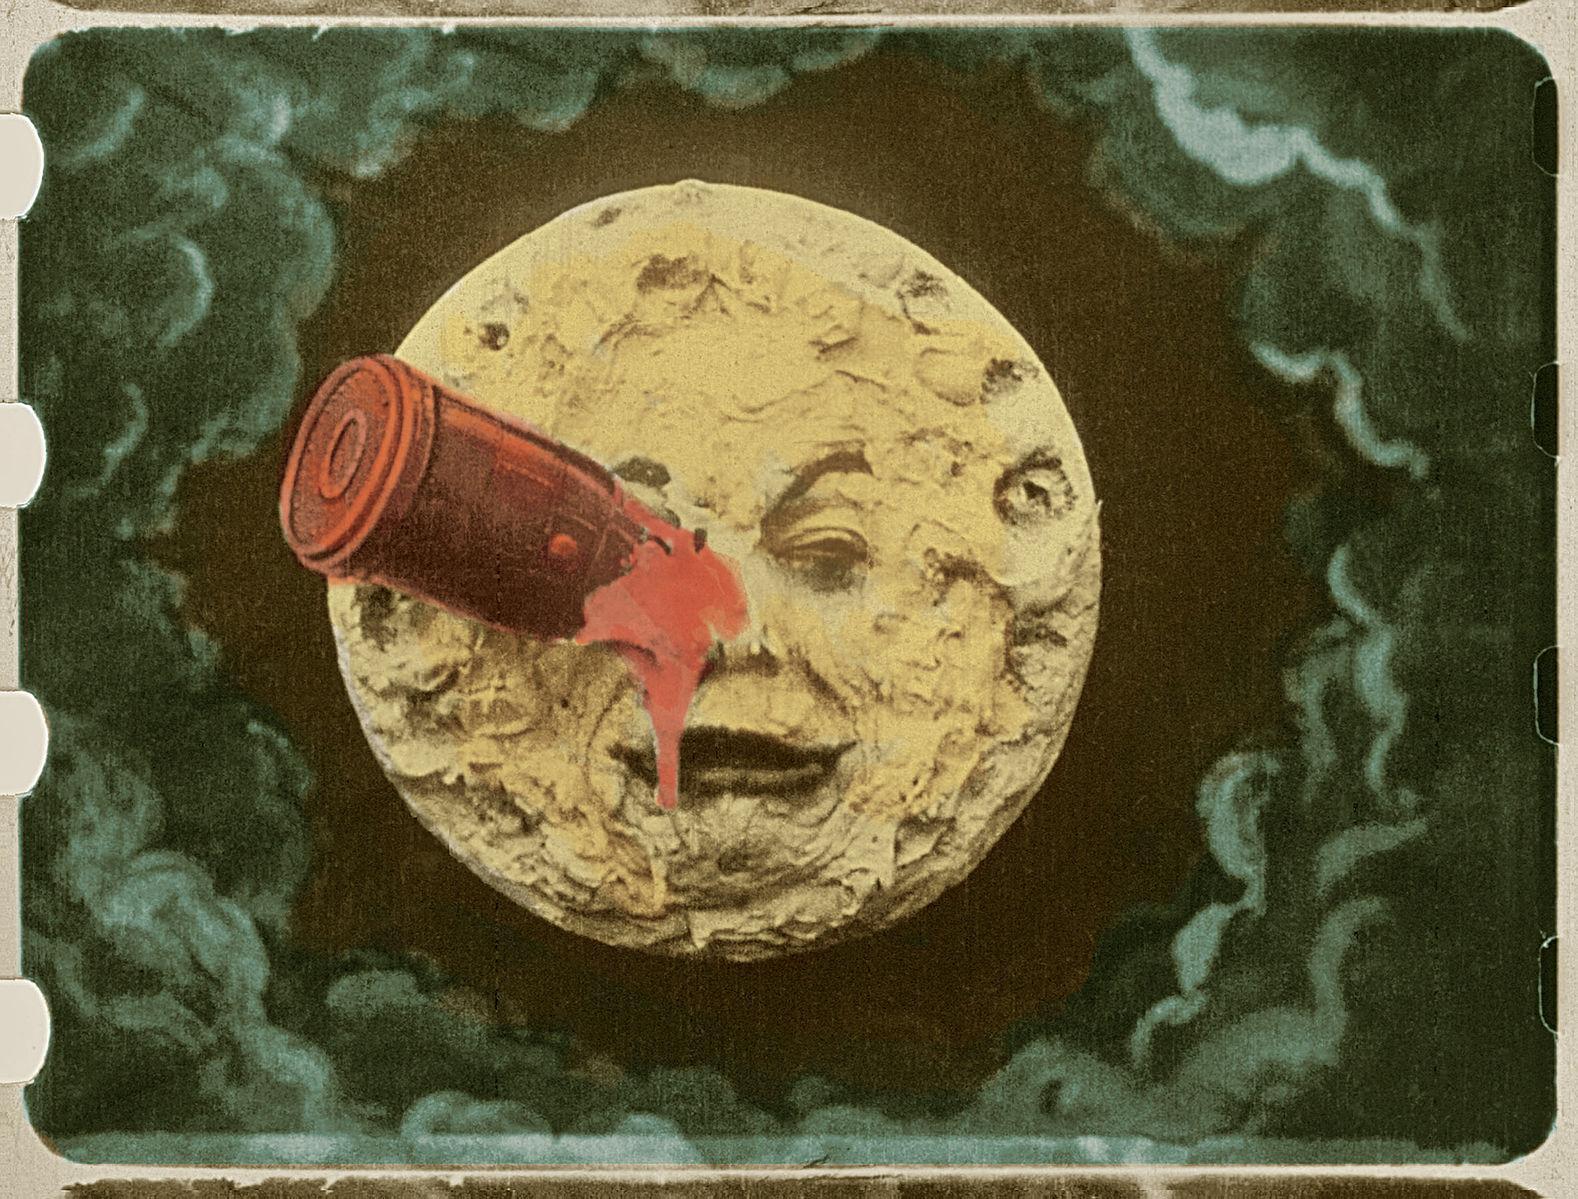 Image of a moon with a face & a red rocket in its eye